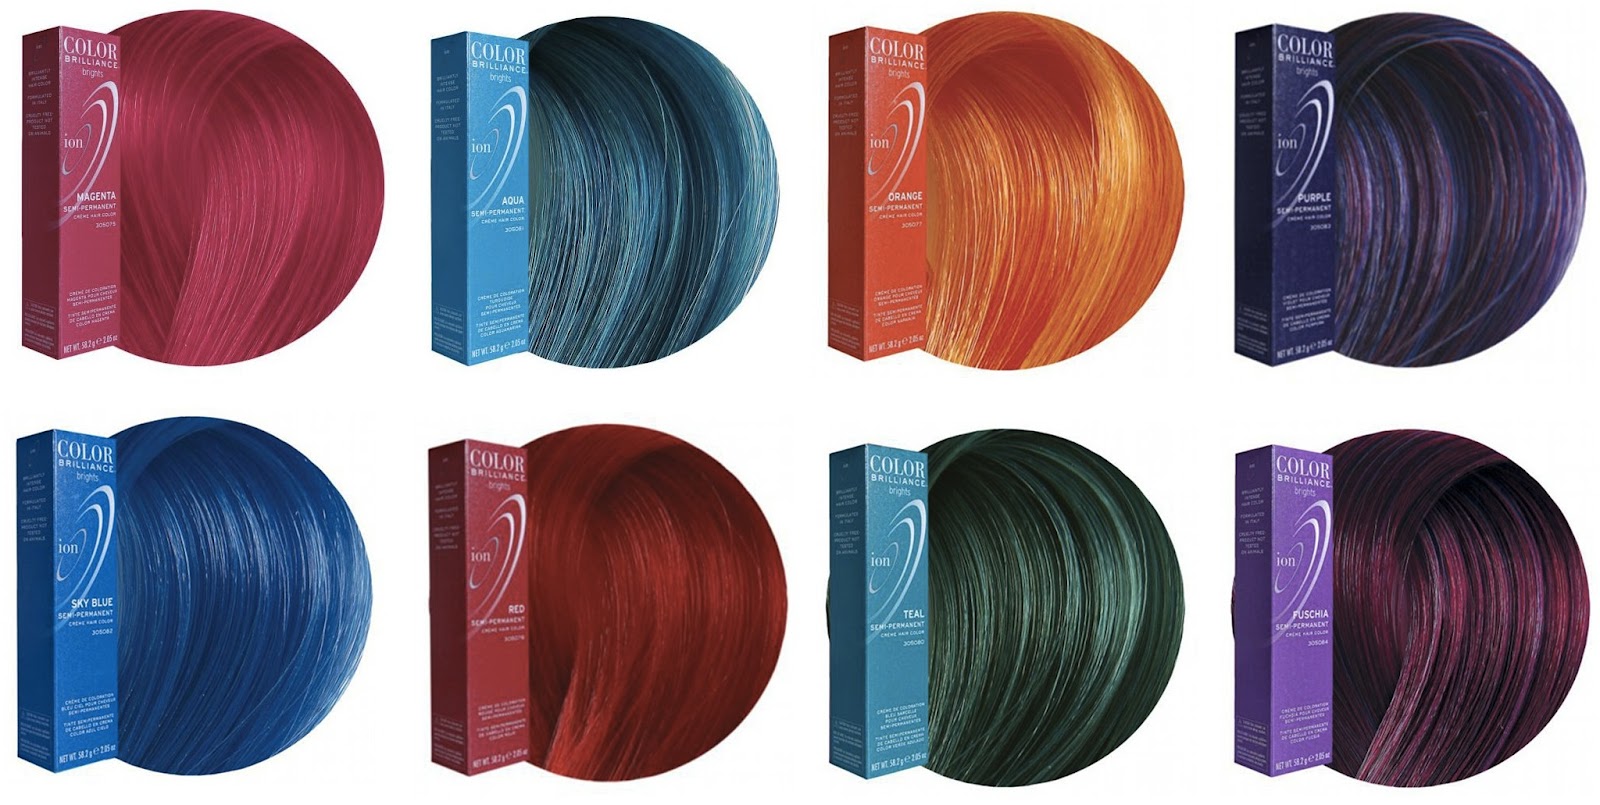 Hair color swatches, Ion color brilliance brights, Ion color brilliance